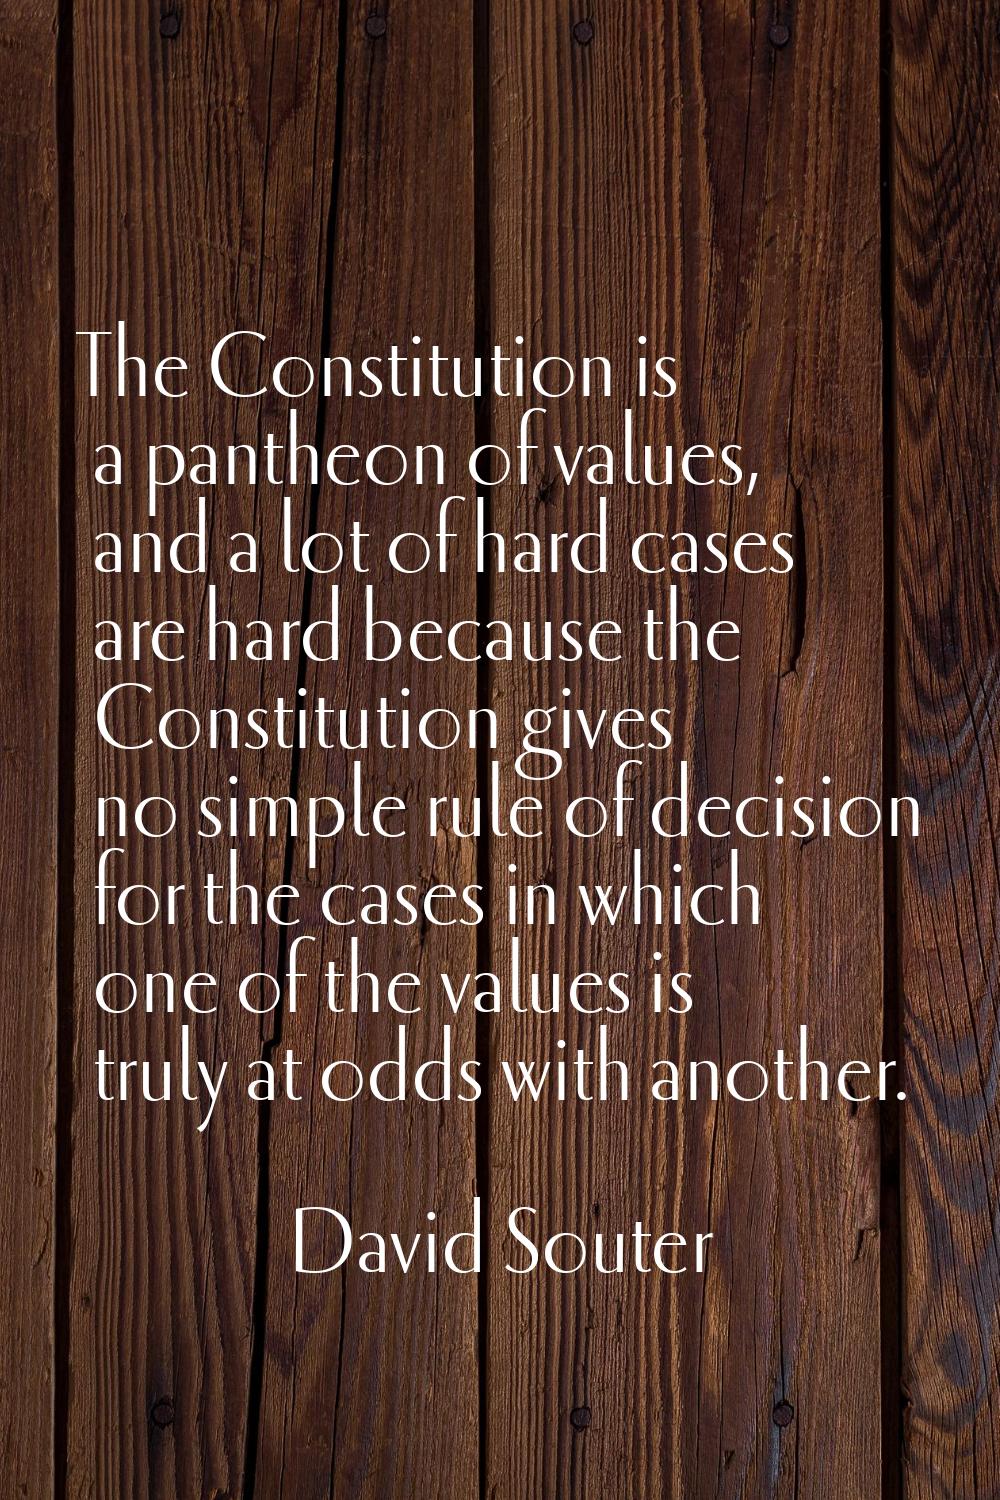 The Constitution is a pantheon of values, and a lot of hard cases are hard because the Constitution